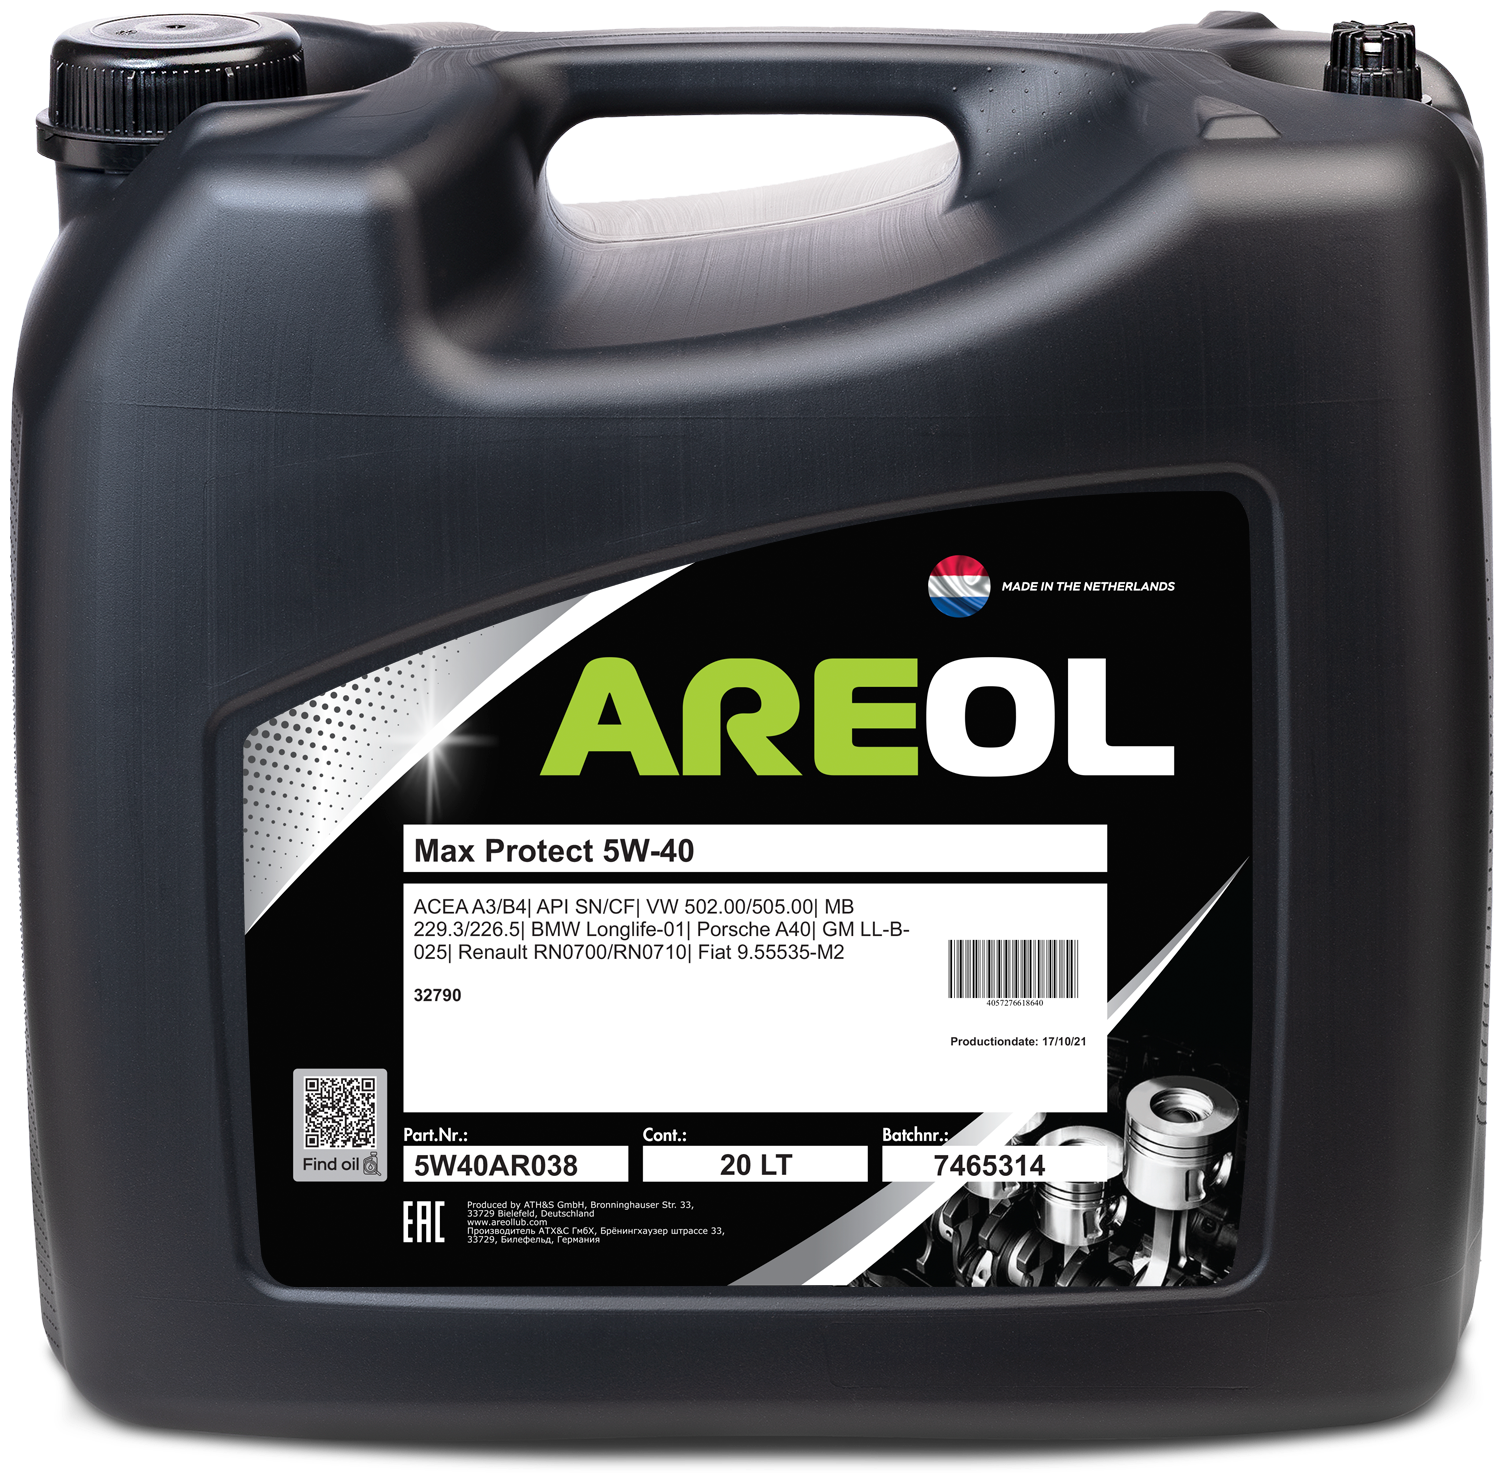 AREOL Areol Max Protect 5w40 (20l)_масло Моторное! Синтacea A3/B4, Api Sn/Cf, Vw 502.00/505.00, Mb 229.3